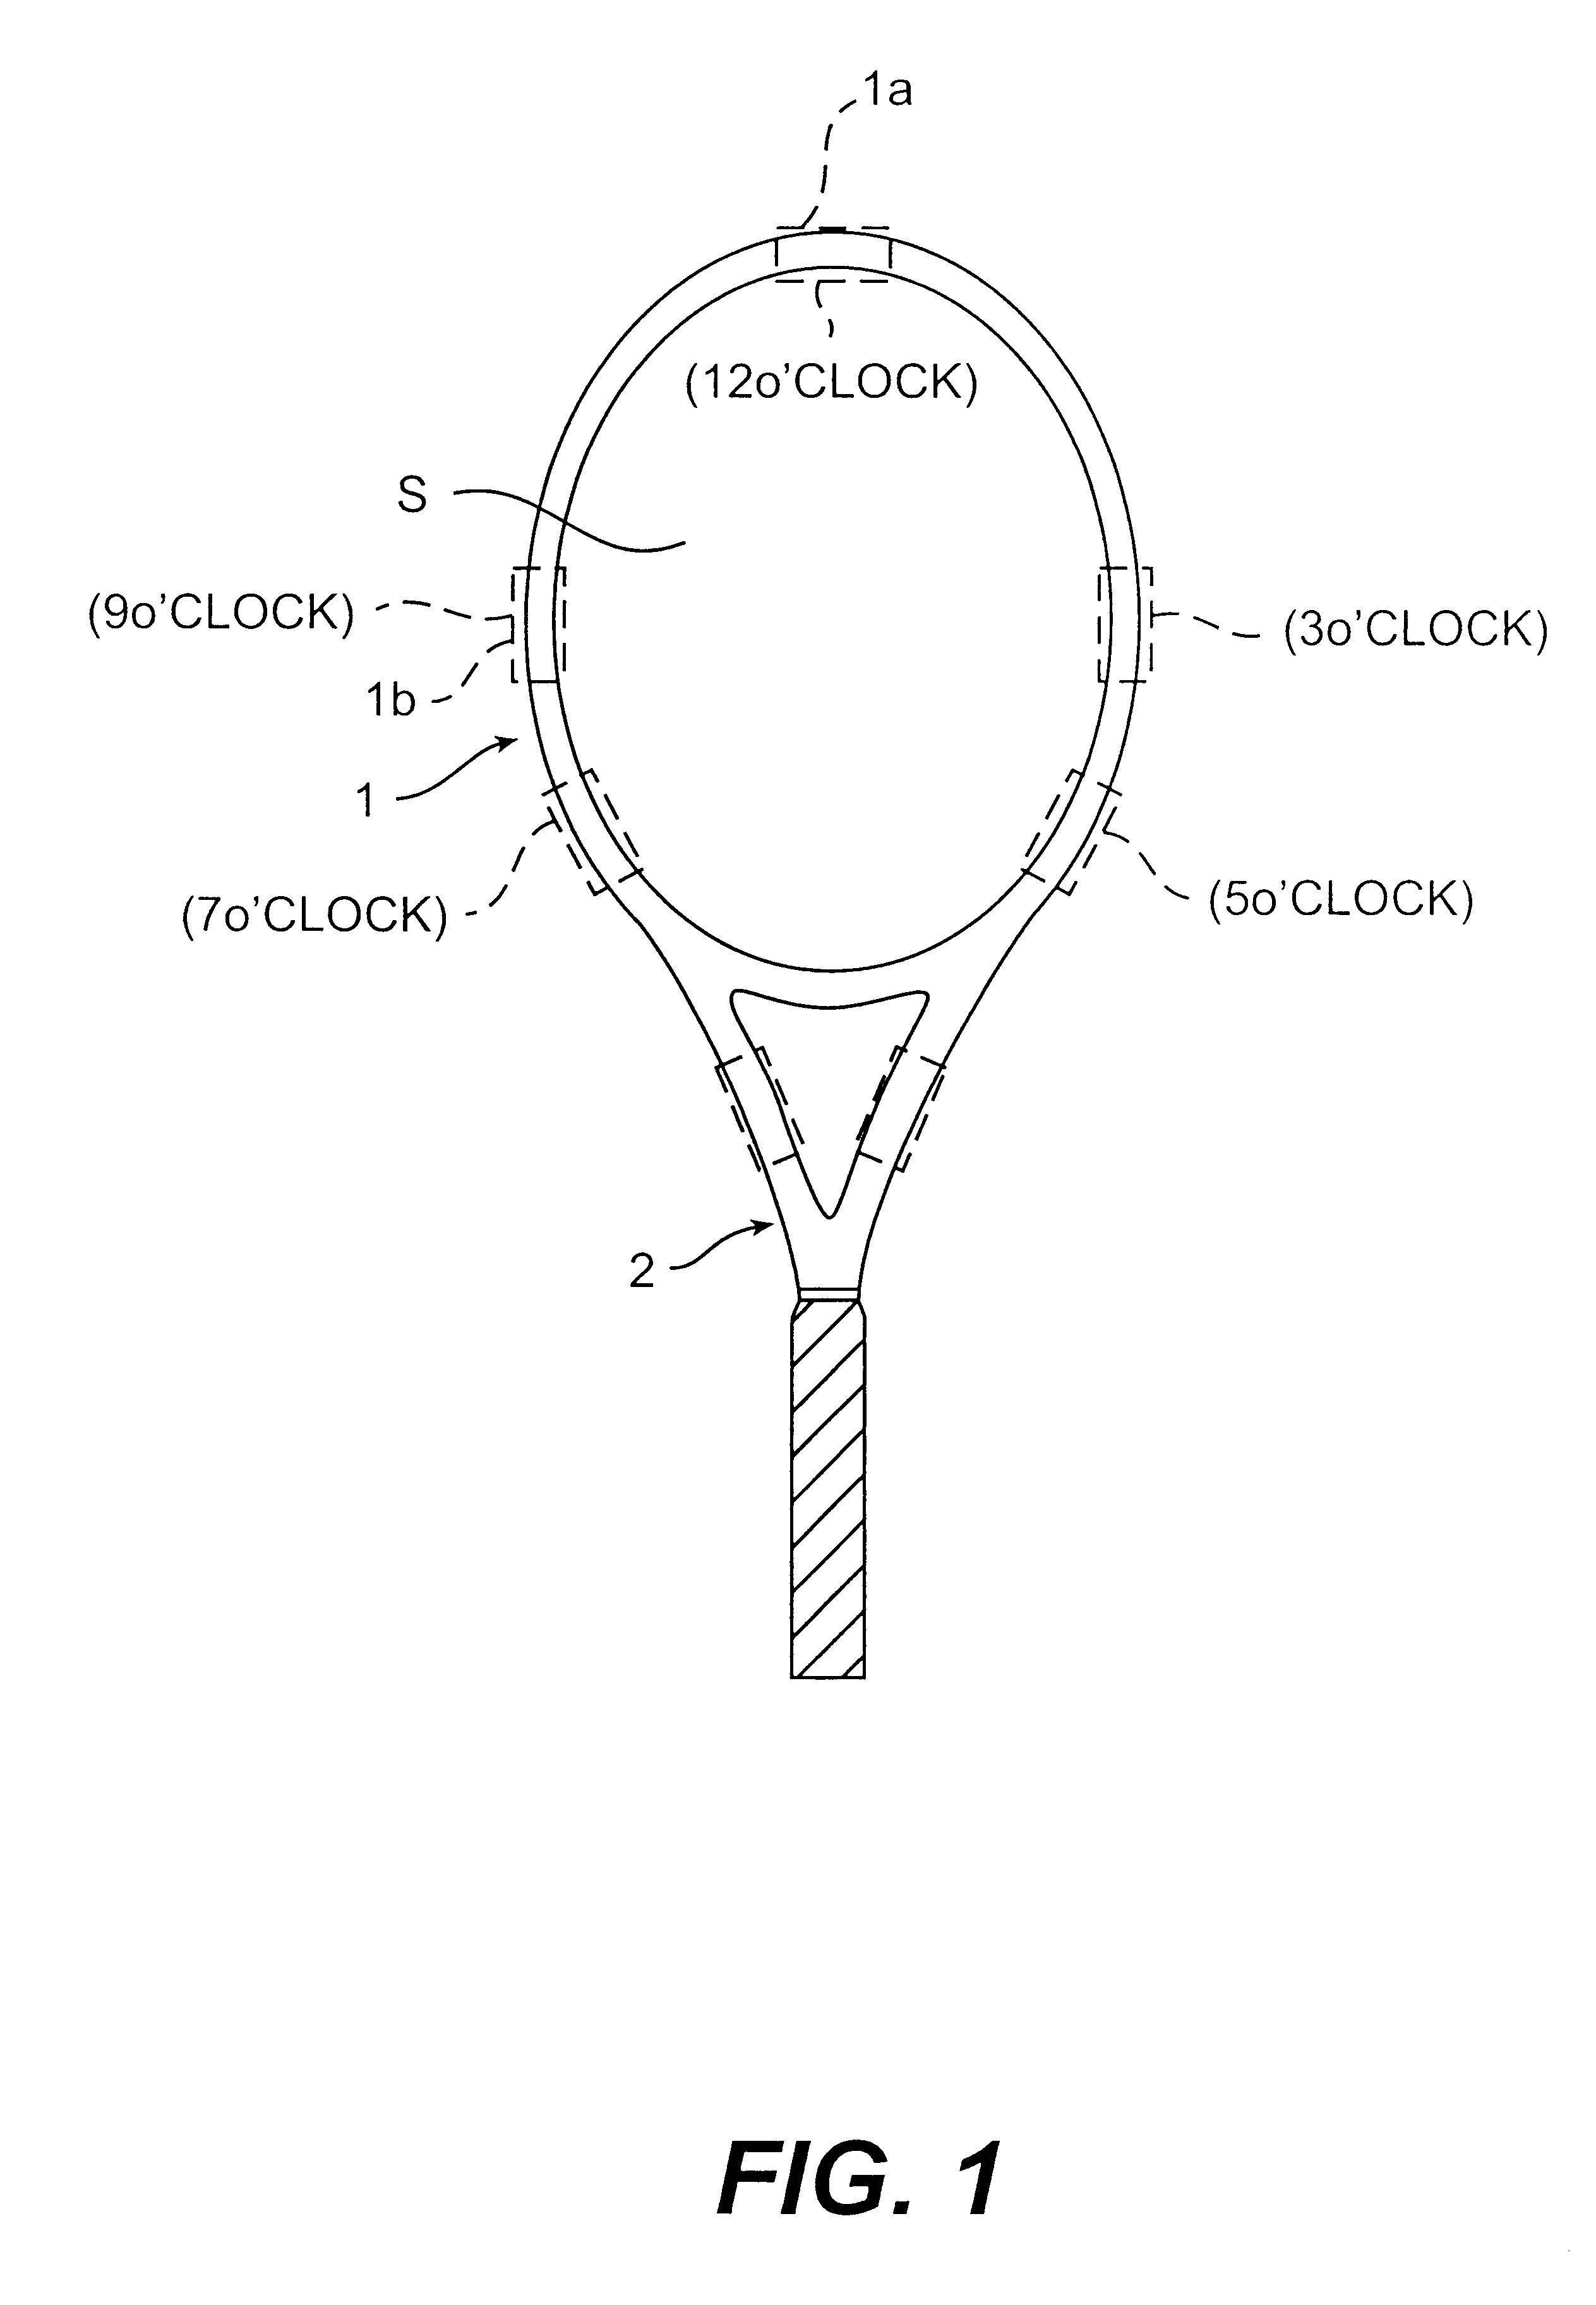 Tennis racket with vibration damping member